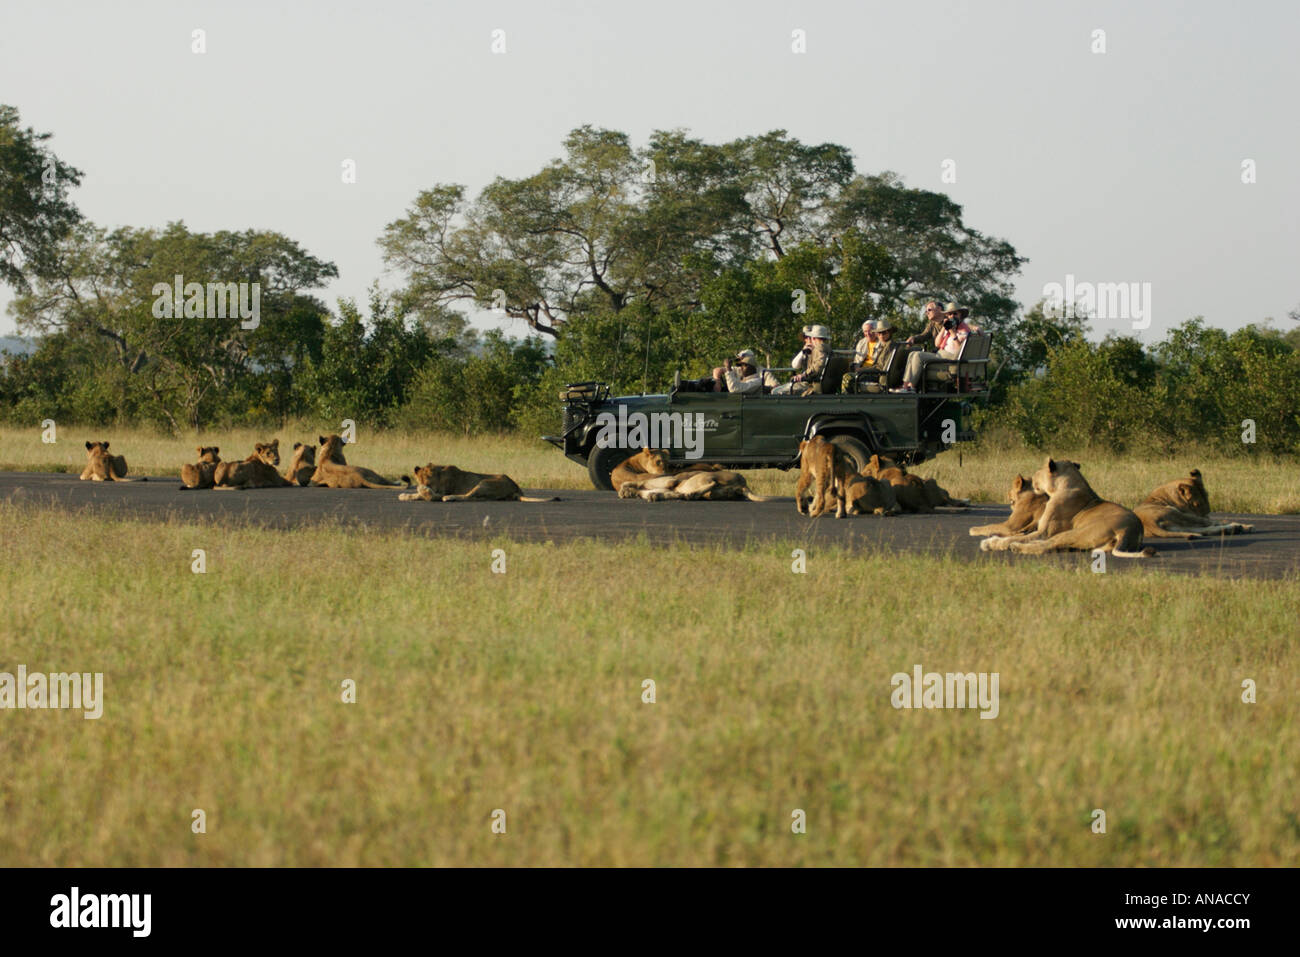 Tourists on a game drive viewing a pride of lions lying around the vehicle in the road Stock Photo